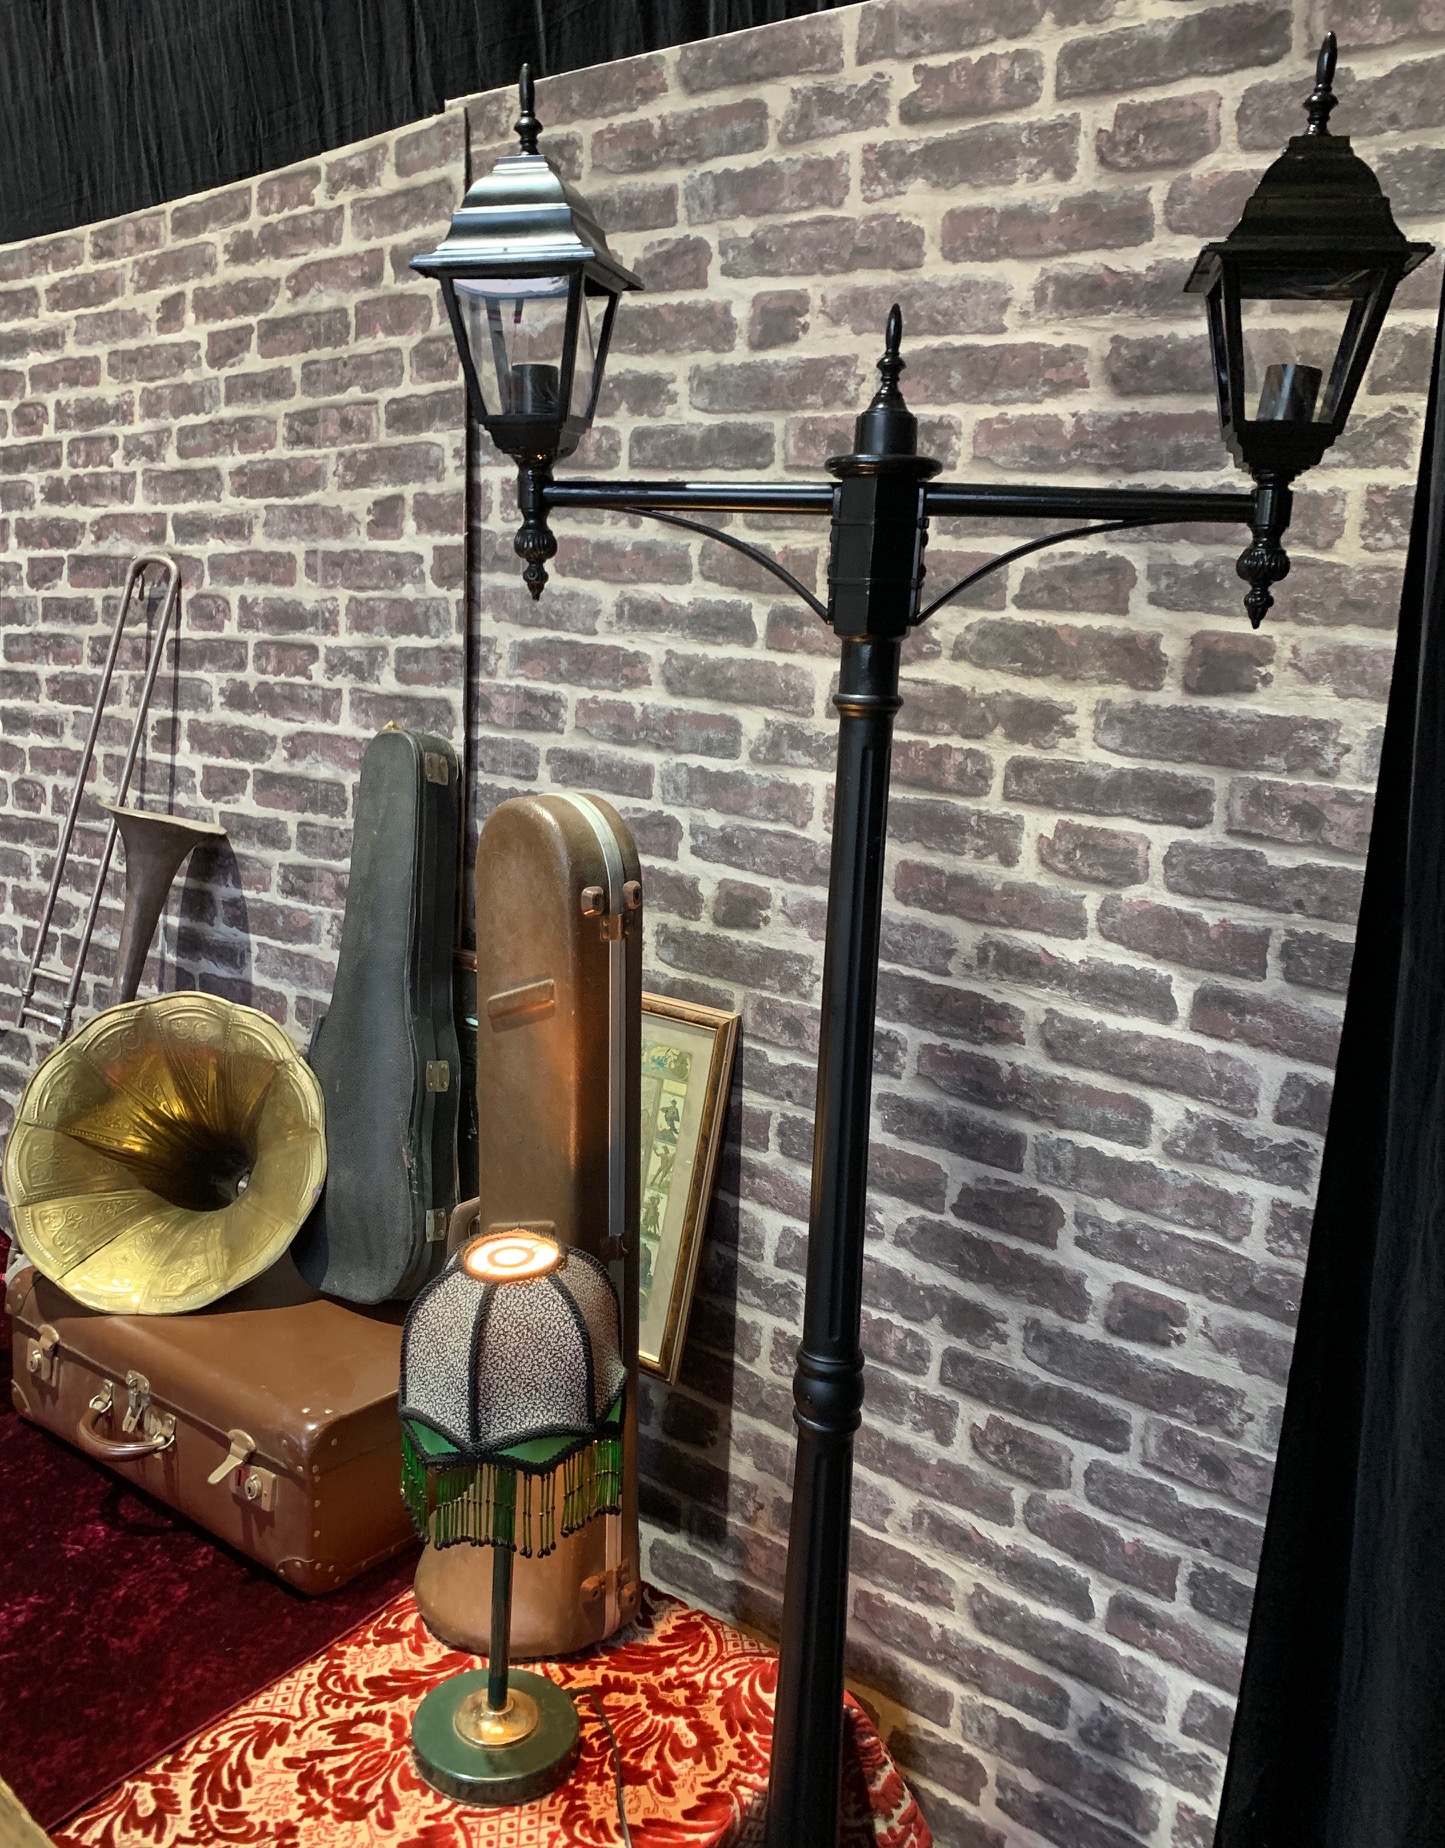 1920’s Brick Wall Streetlamp - Prop For Hire